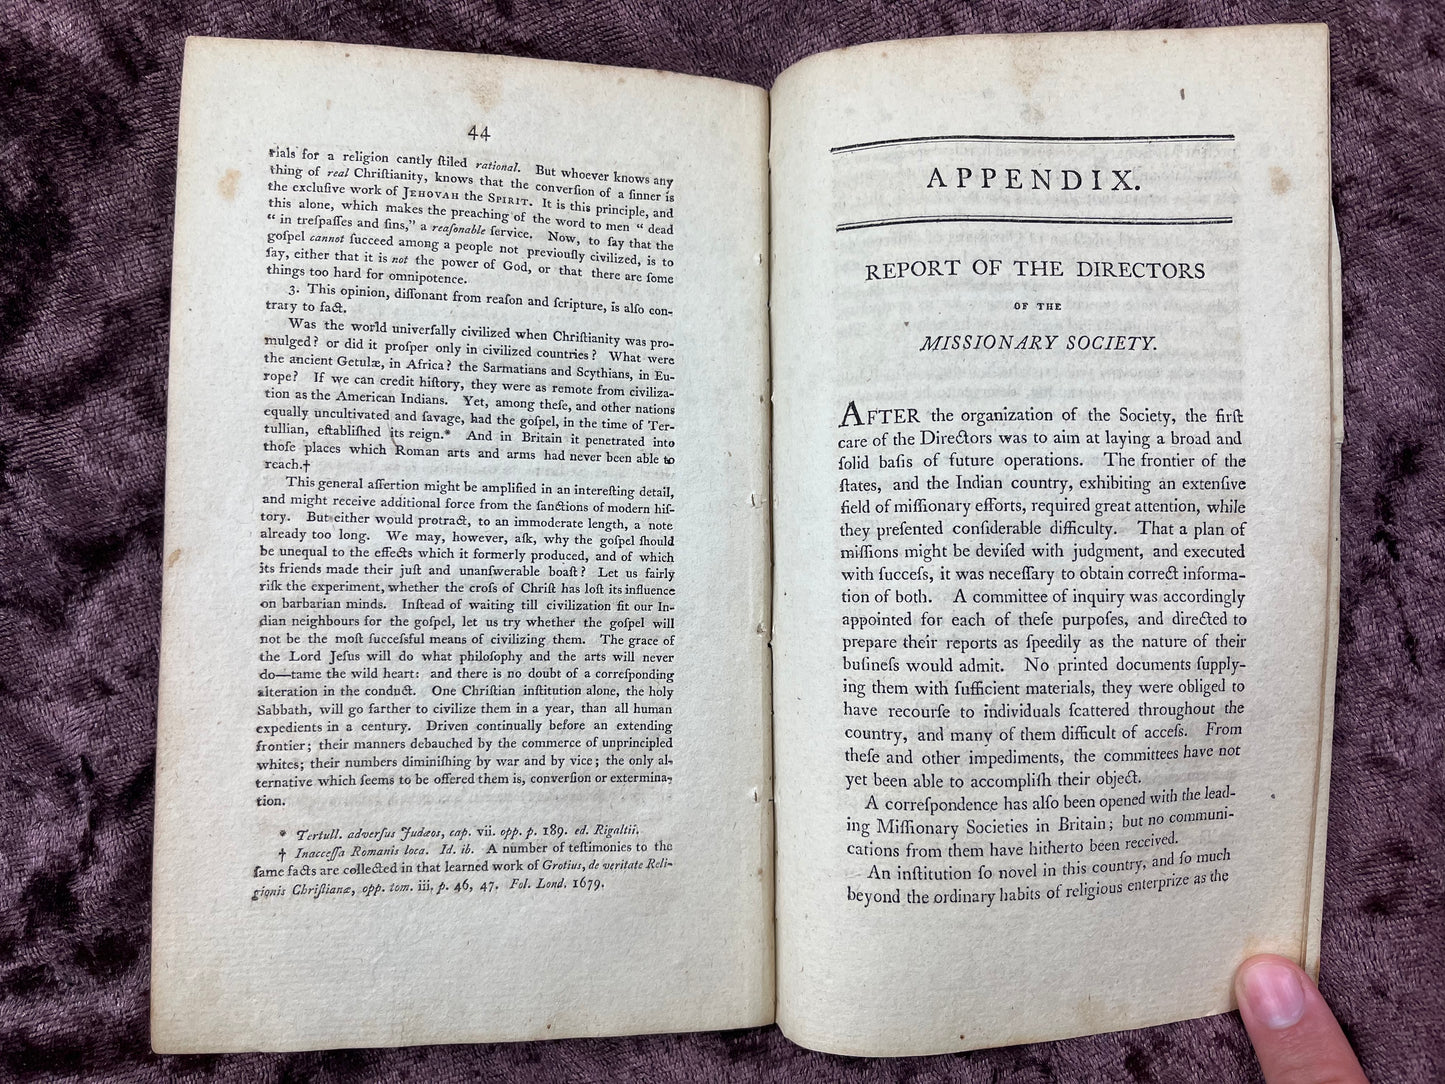 1797 Octavo First Edition Pamphlet Hope For The Heathen. A Sermon Preached In The Old Presbyterian Church Before The New York Missionary Society At Their Annual Meeting By John M. Mason